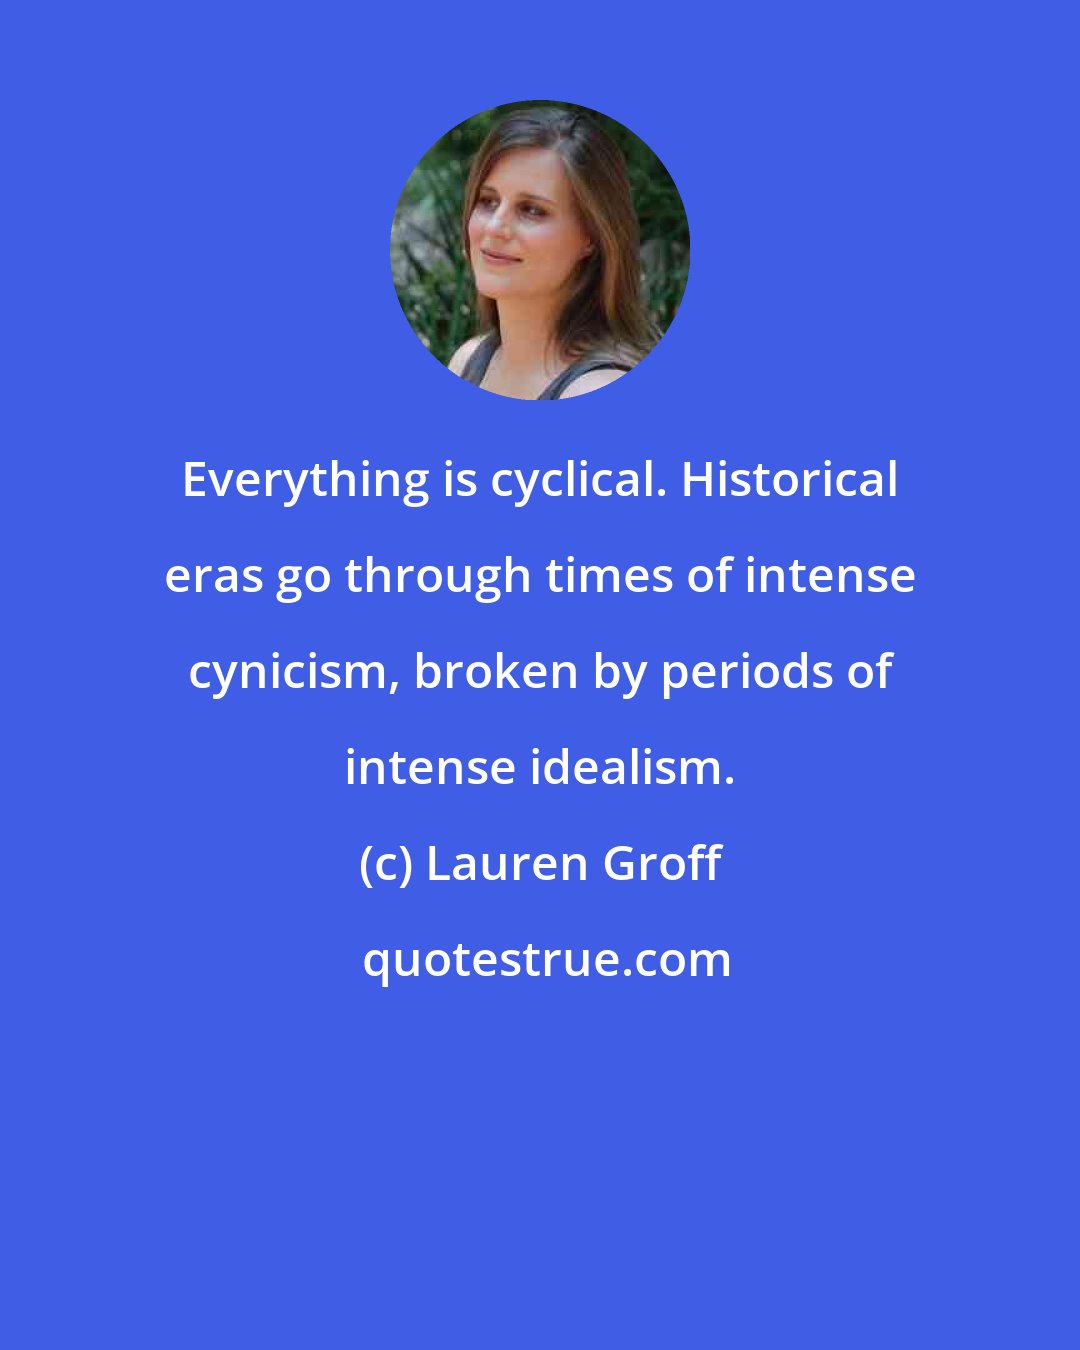 Lauren Groff: Everything is cyclical. Historical eras go through times of intense cynicism, broken by periods of intense idealism.